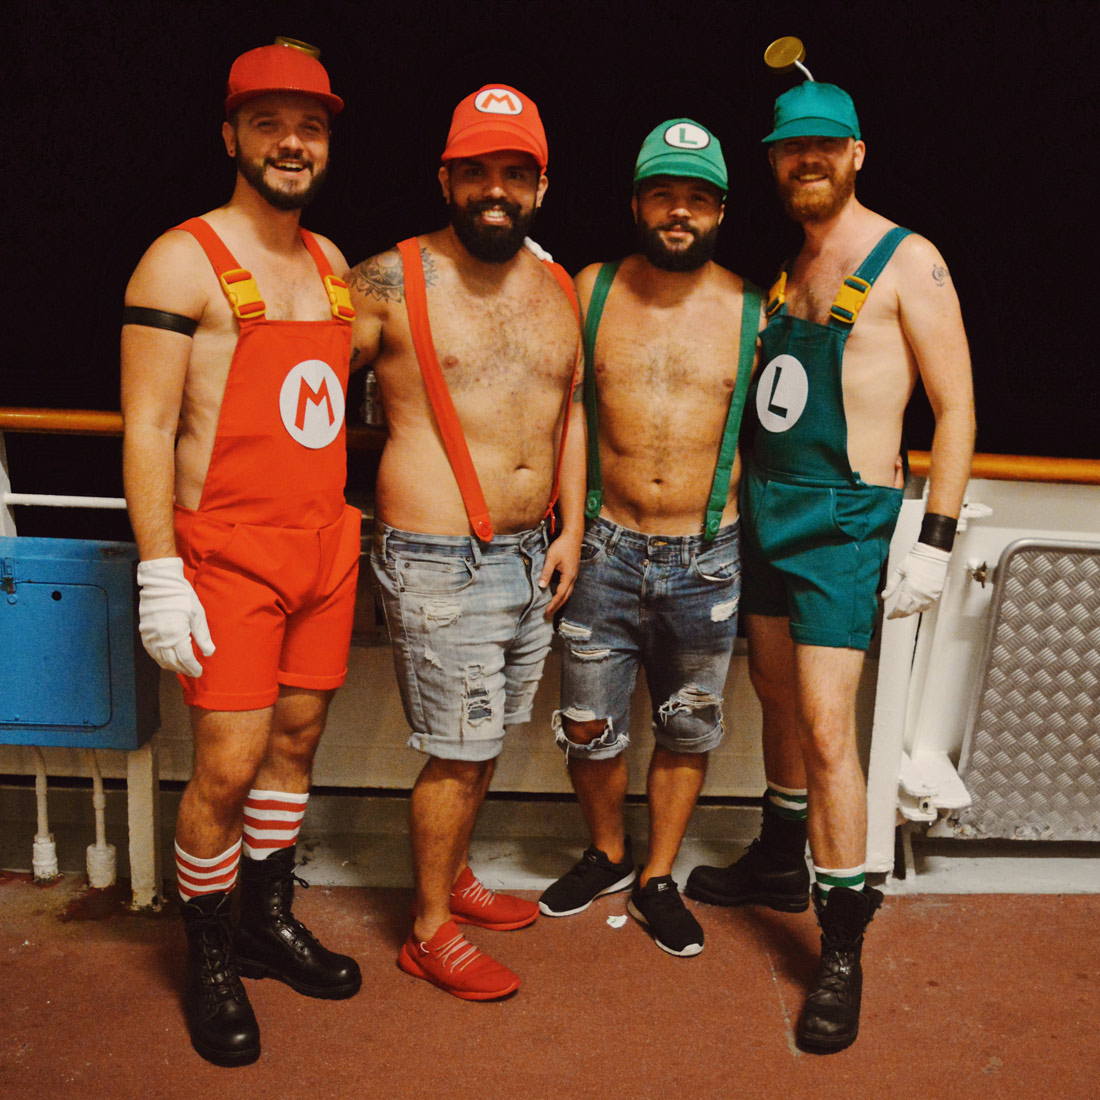 Making new friends from Costa Rica: Super Mario Brothers! © CoupleofMen.com